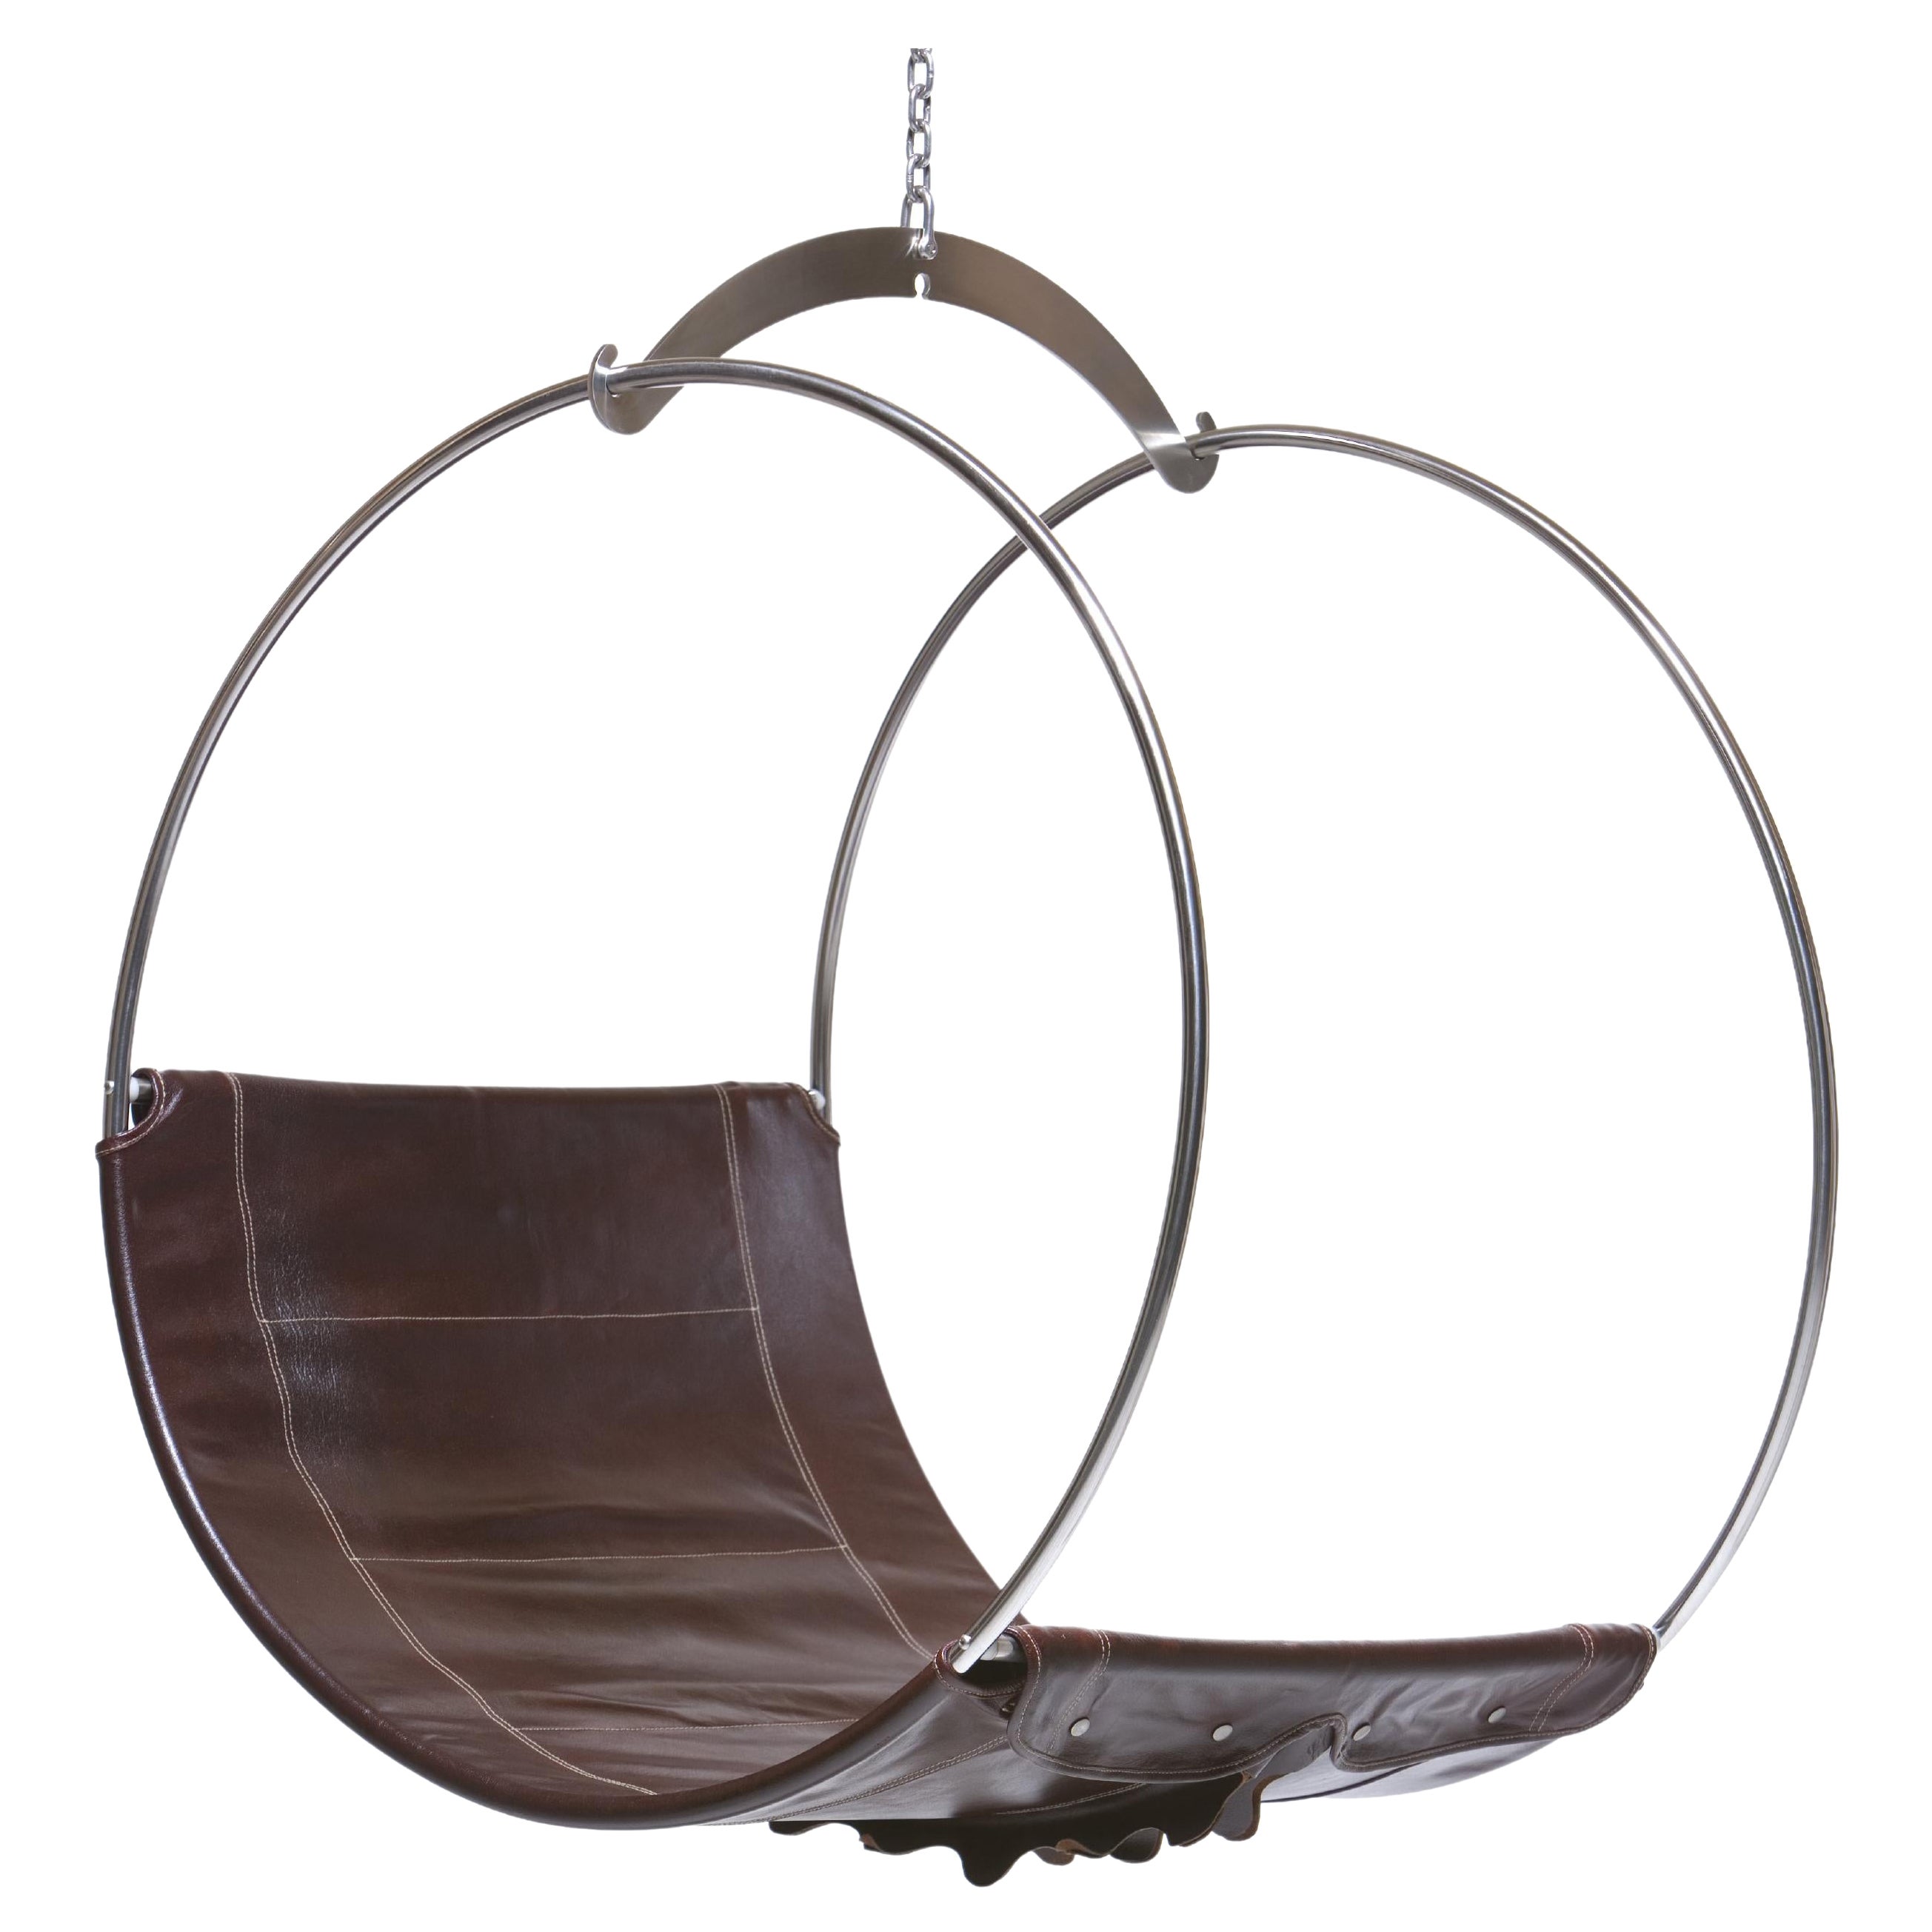 Leather Swing Chair by Egg Designs